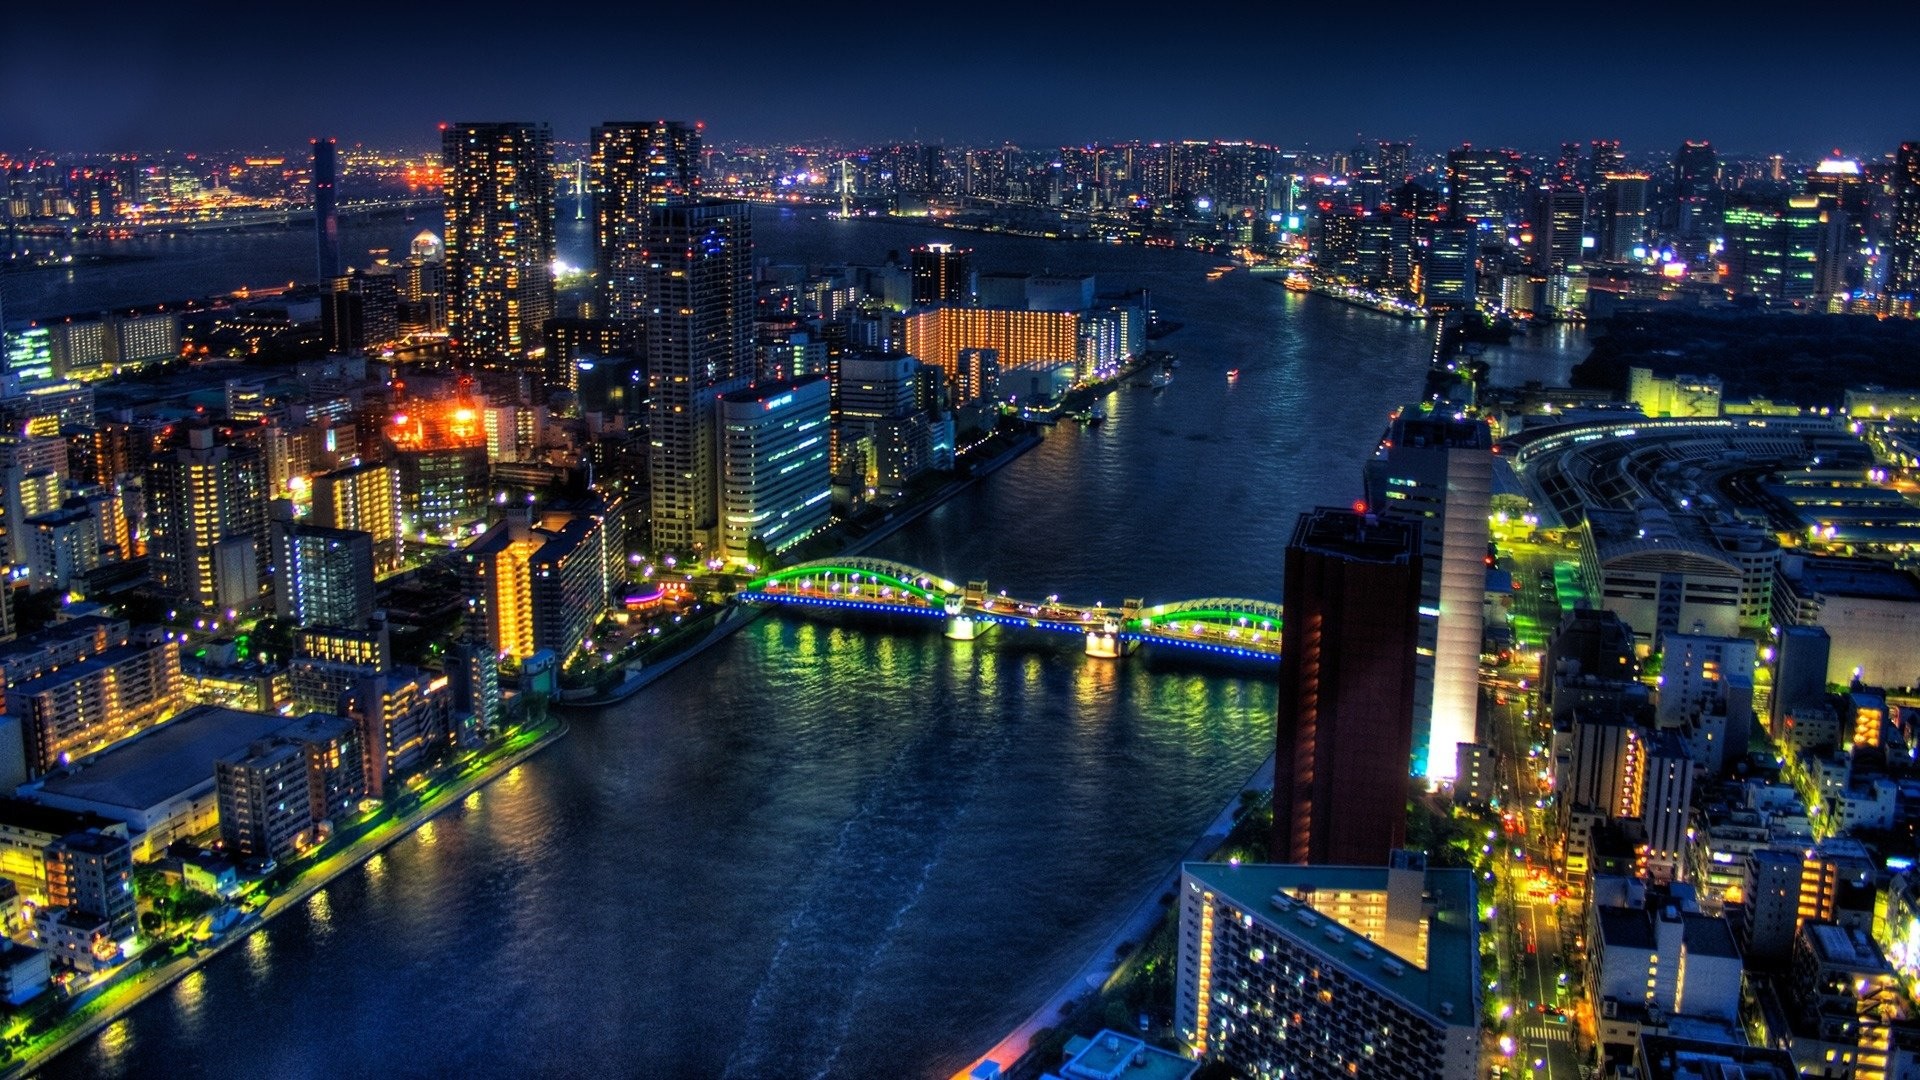 1920x1080 Tokyo City At Night. SHARE. TAGS: Panoramic Twitter Backgrounds ...